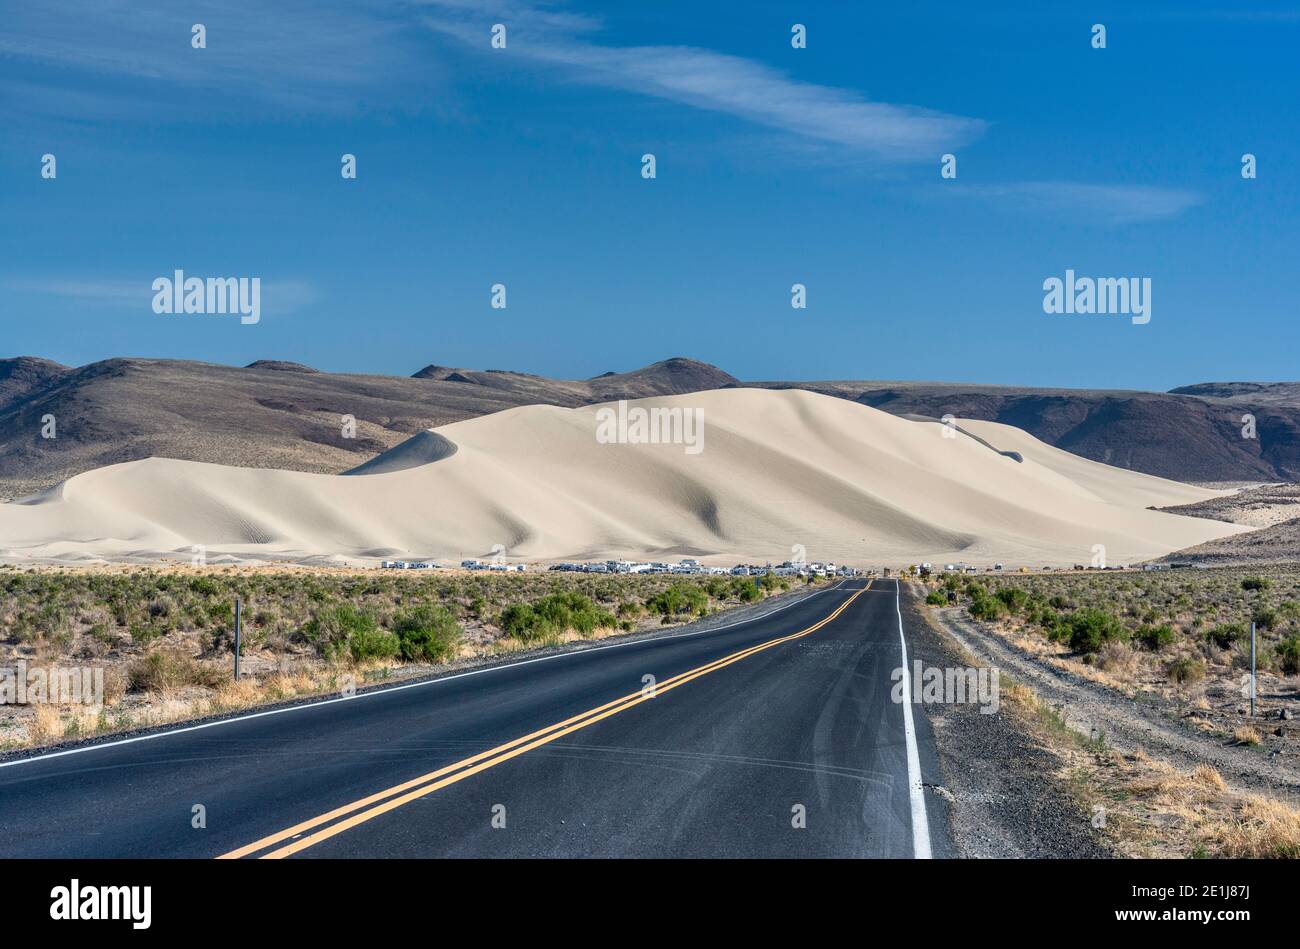 Dunes at Sand Mountain Recreation Area, Great Basin Desert, off The Loneliest Road (Hwy 50) near Fallon, Nevada, USA Stock Photo